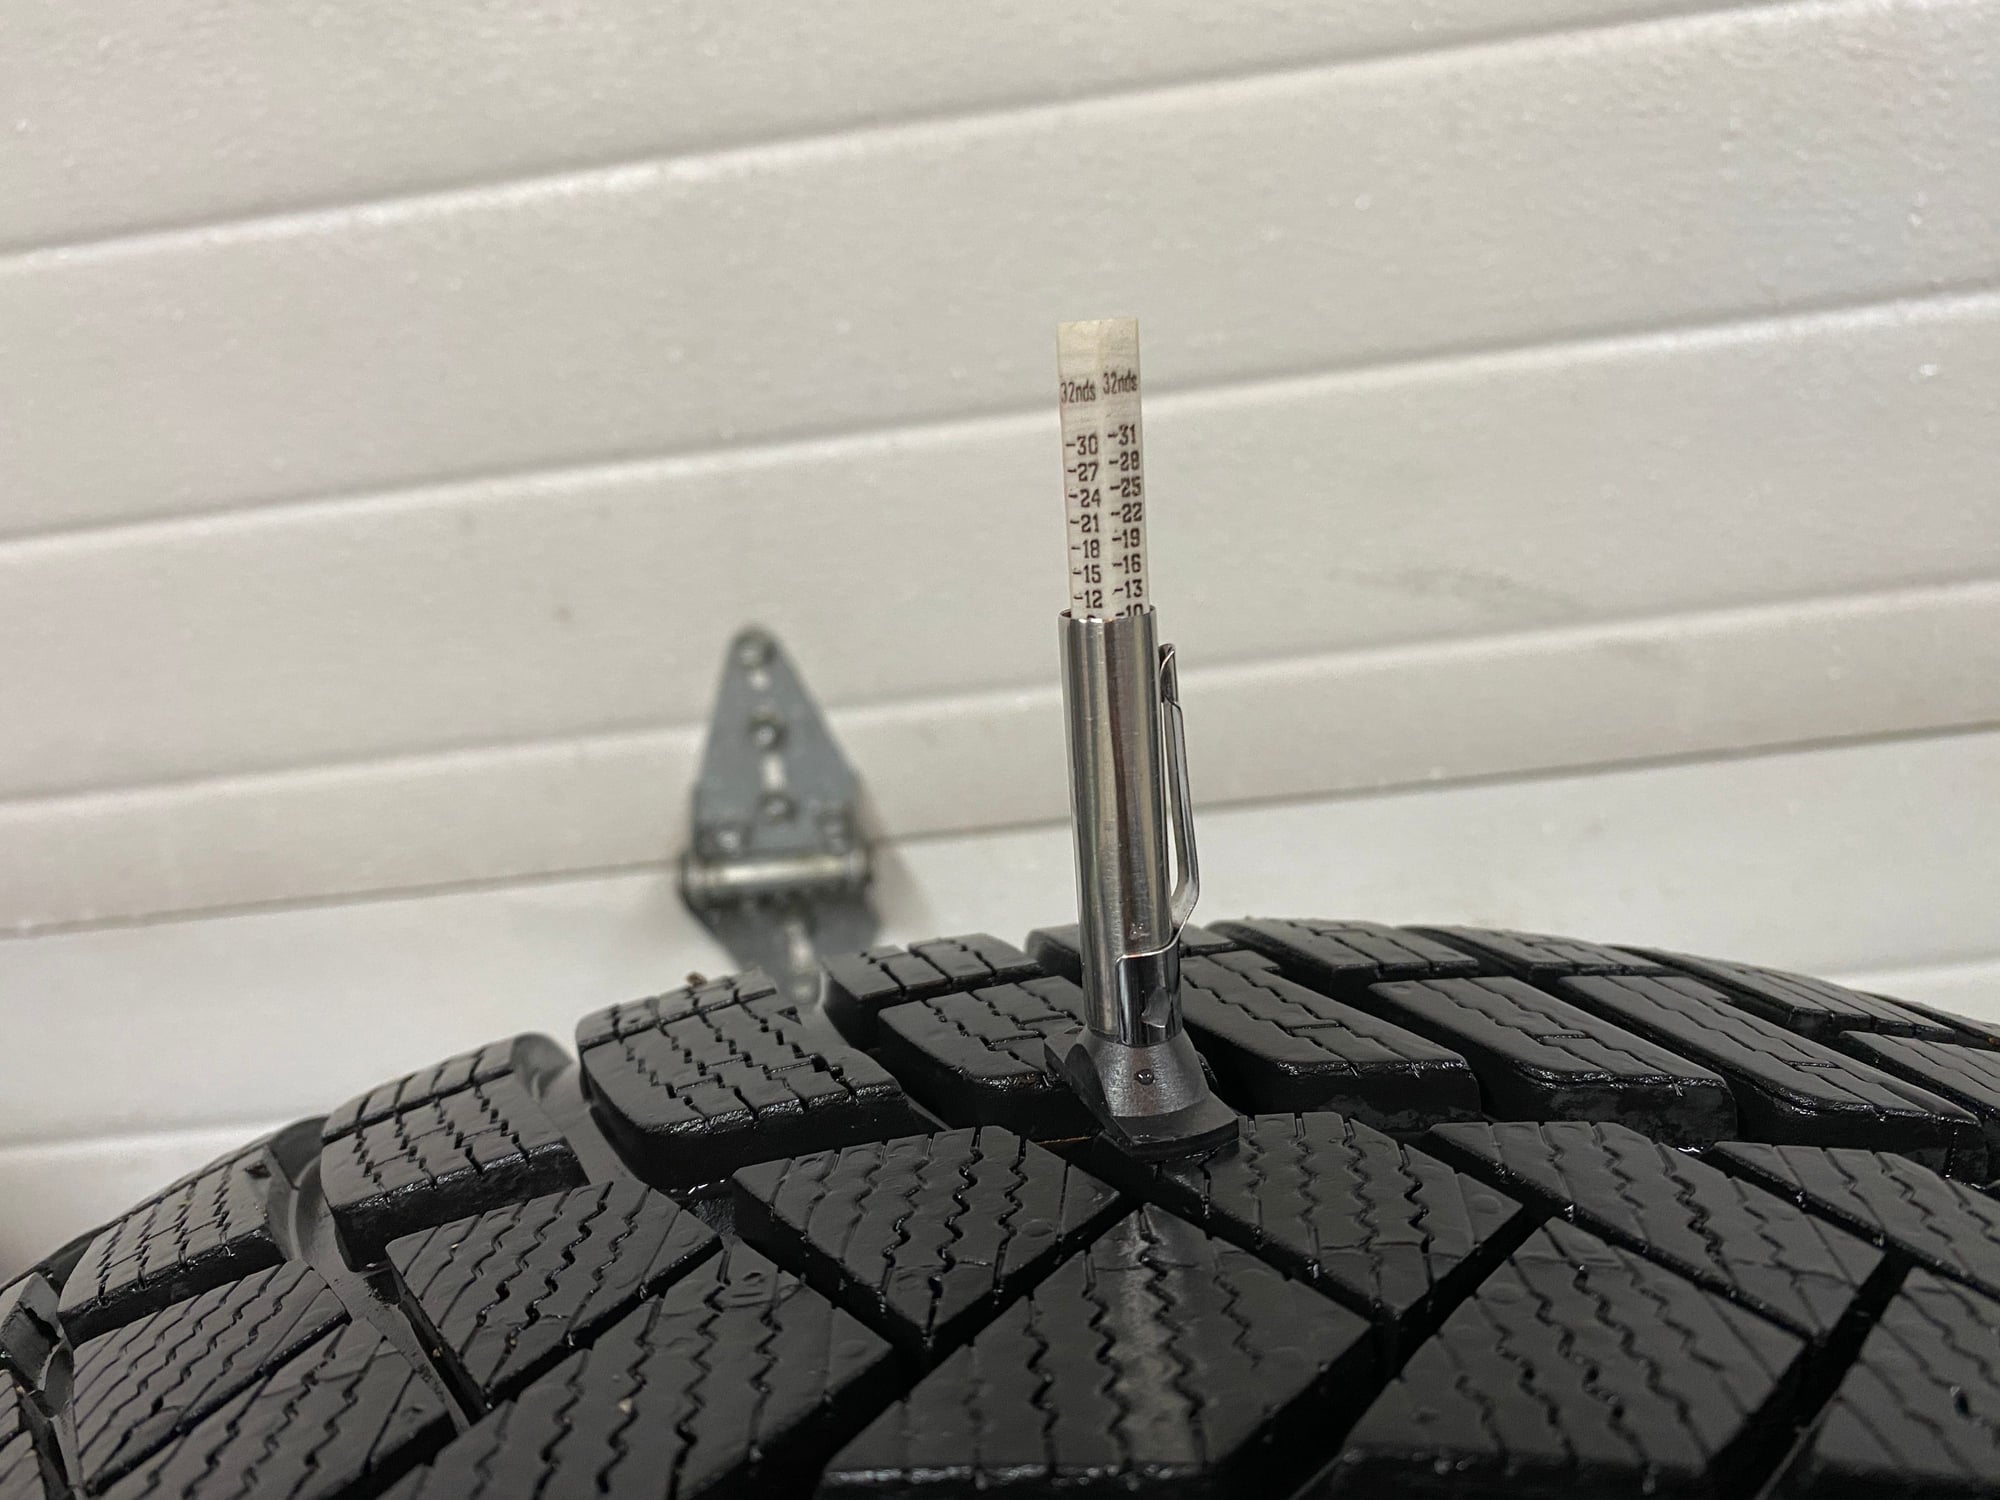 Wheels and Tires/Axles - ***for sale - winter wheel & tire set f-type*** - Used - All Years  All Models - Deerfield, IL 60015, United States